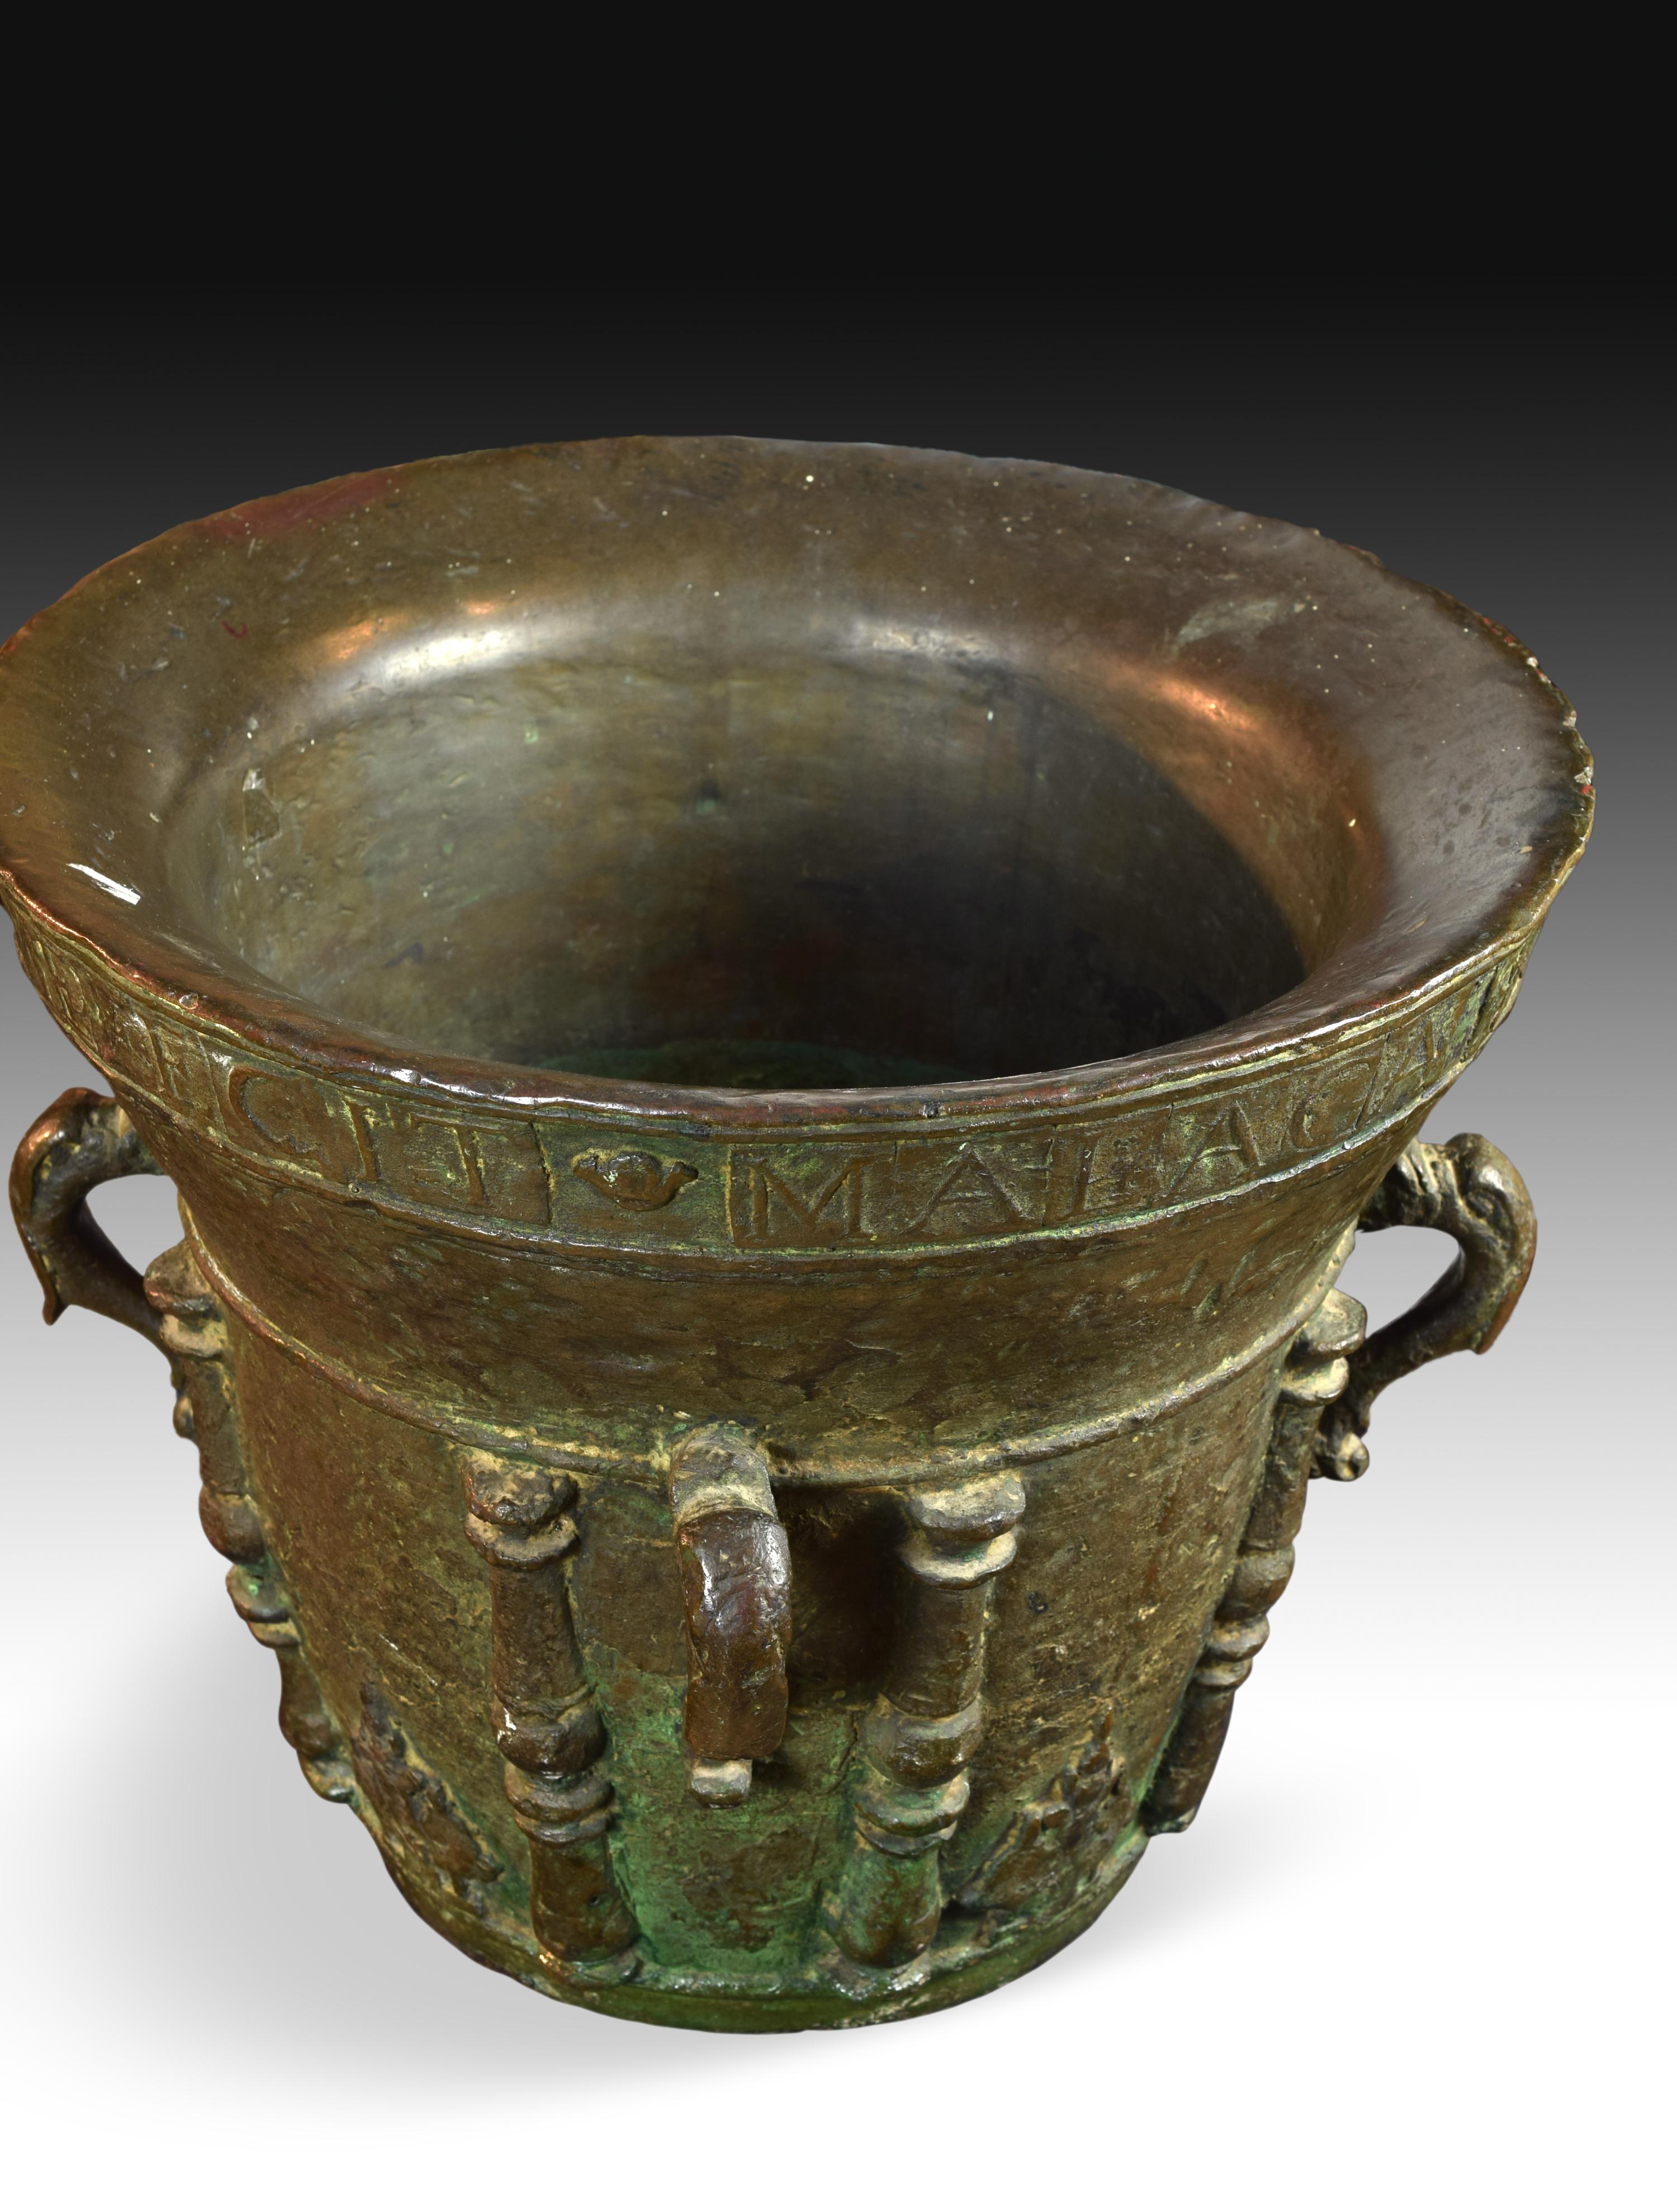 Bronze pharmacy mortar. Signed and dated (Bargas, 1711).
It has an excavated mouth, a truncated conical body with a slight inversion and a base highlighted by a flat molding that does not protrude from the mortar profile. The decoration is located